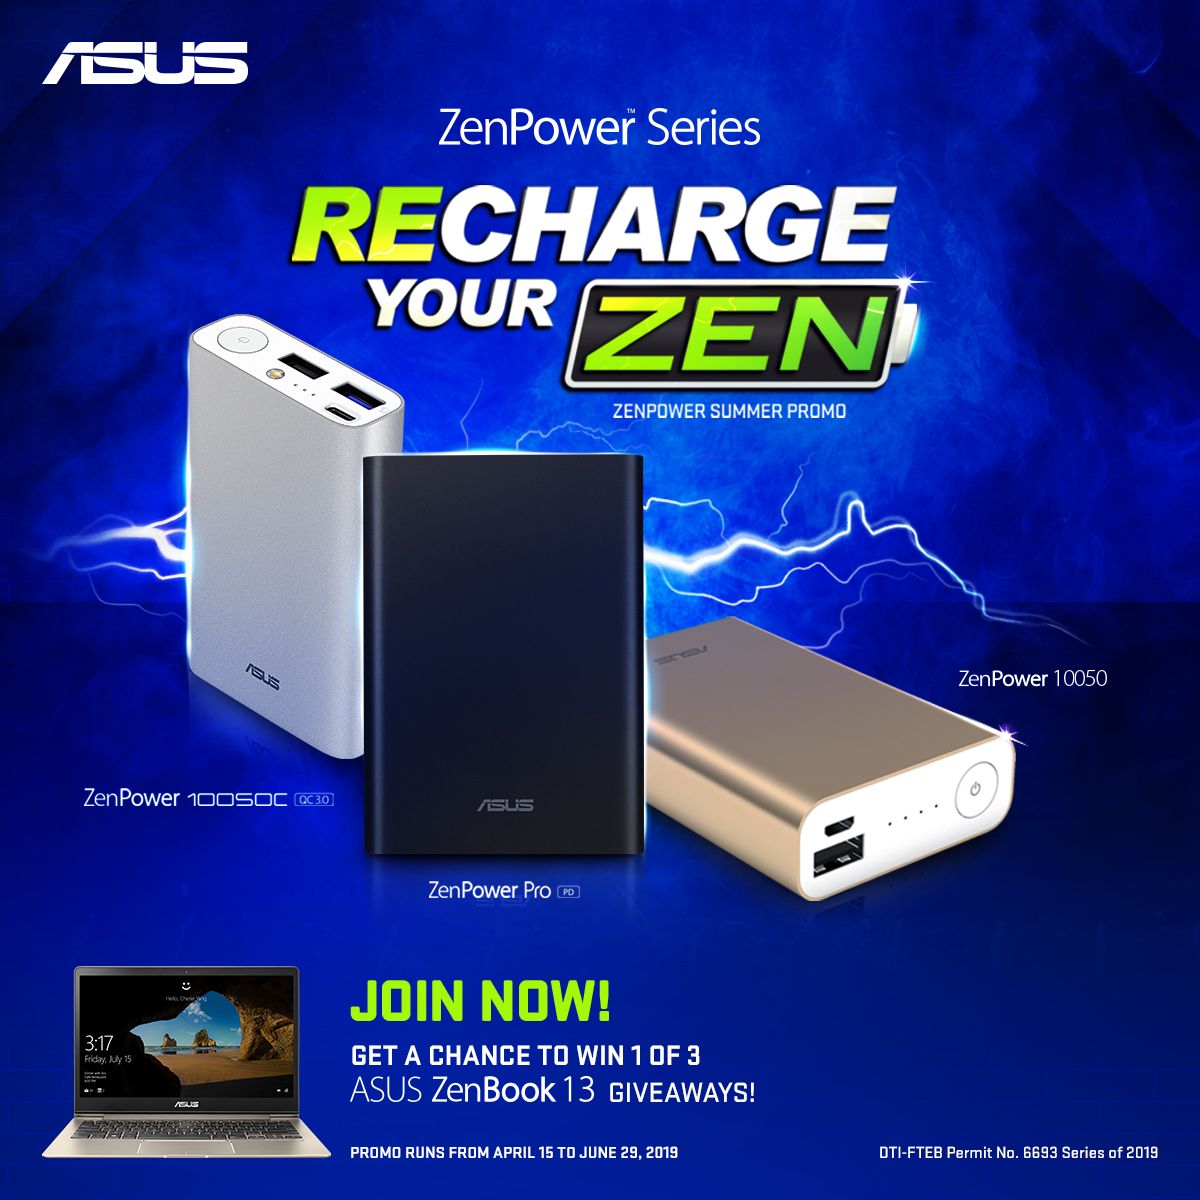 ASUS PHILIPPINES POWERS UP THE SUMMER SEASON WITH THE “RECHARGE YOUR ZEN” PROMO